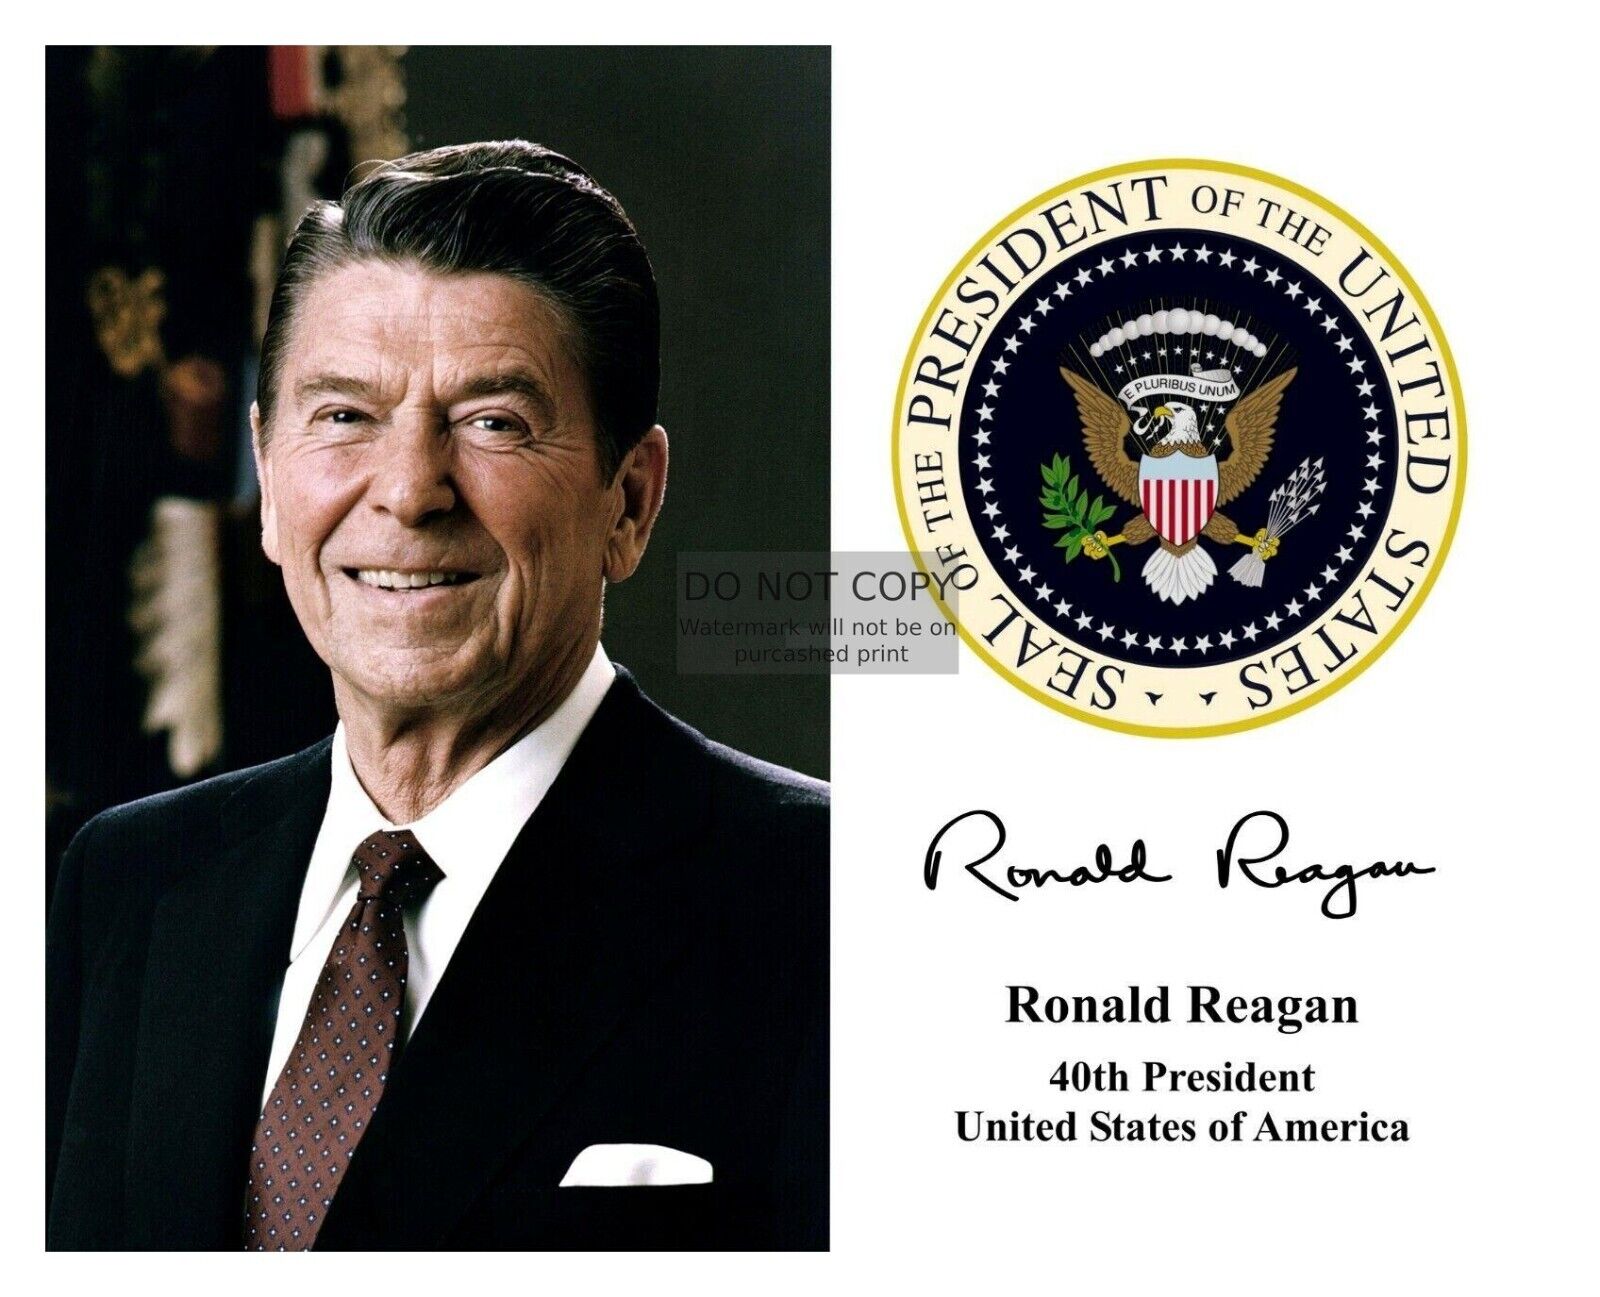 PRESIDENT RONALD REAGAN PRESIDENTIAL SEAL AUTOGRAPHED 8X10 PHOTOGRAPH